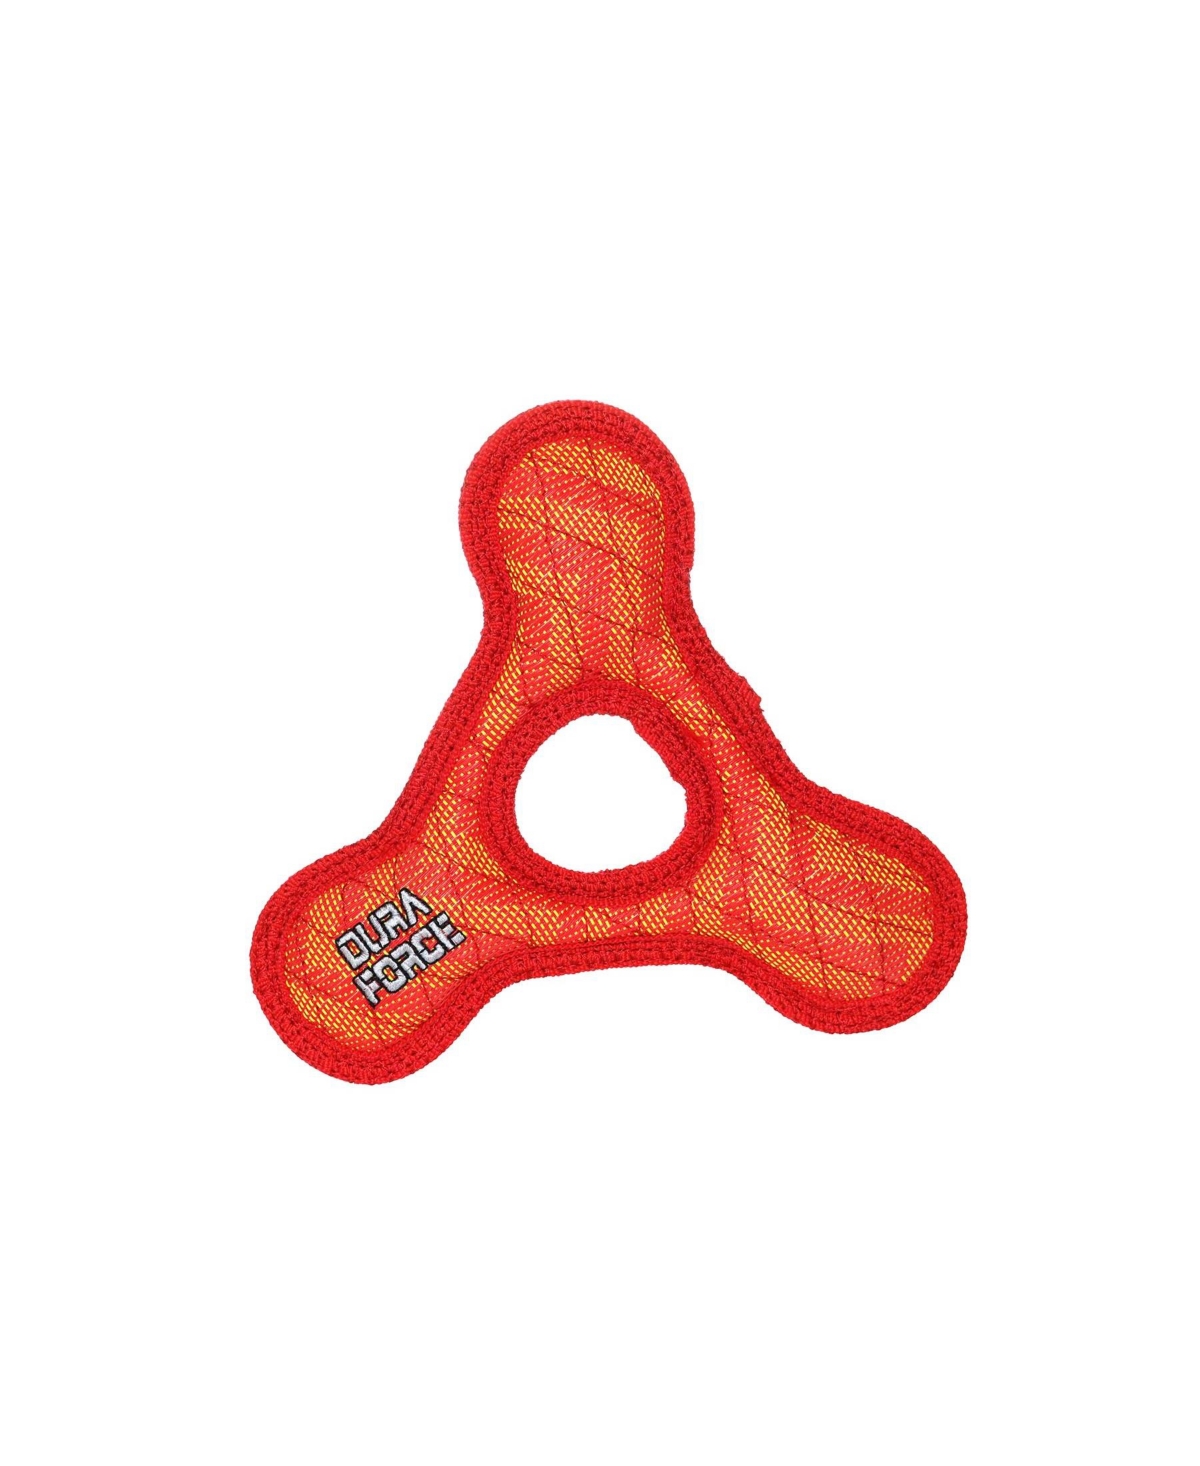 Jr TriangleRing ZigZag Red-Red, Dog Toy - Bright Red